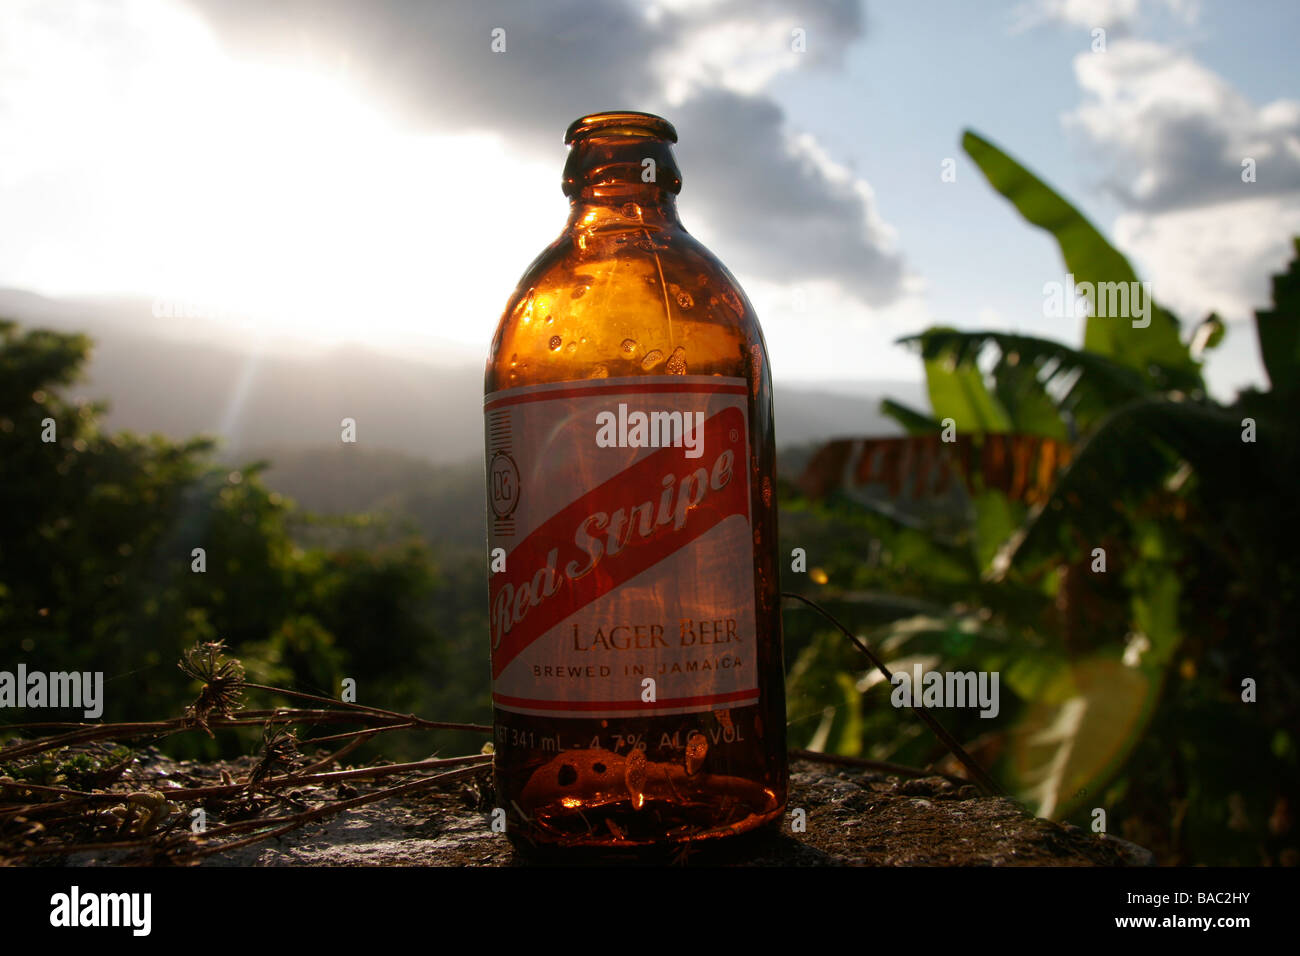 Red Stripe bottle set against beautiful Jamaican mountains Stock Photo